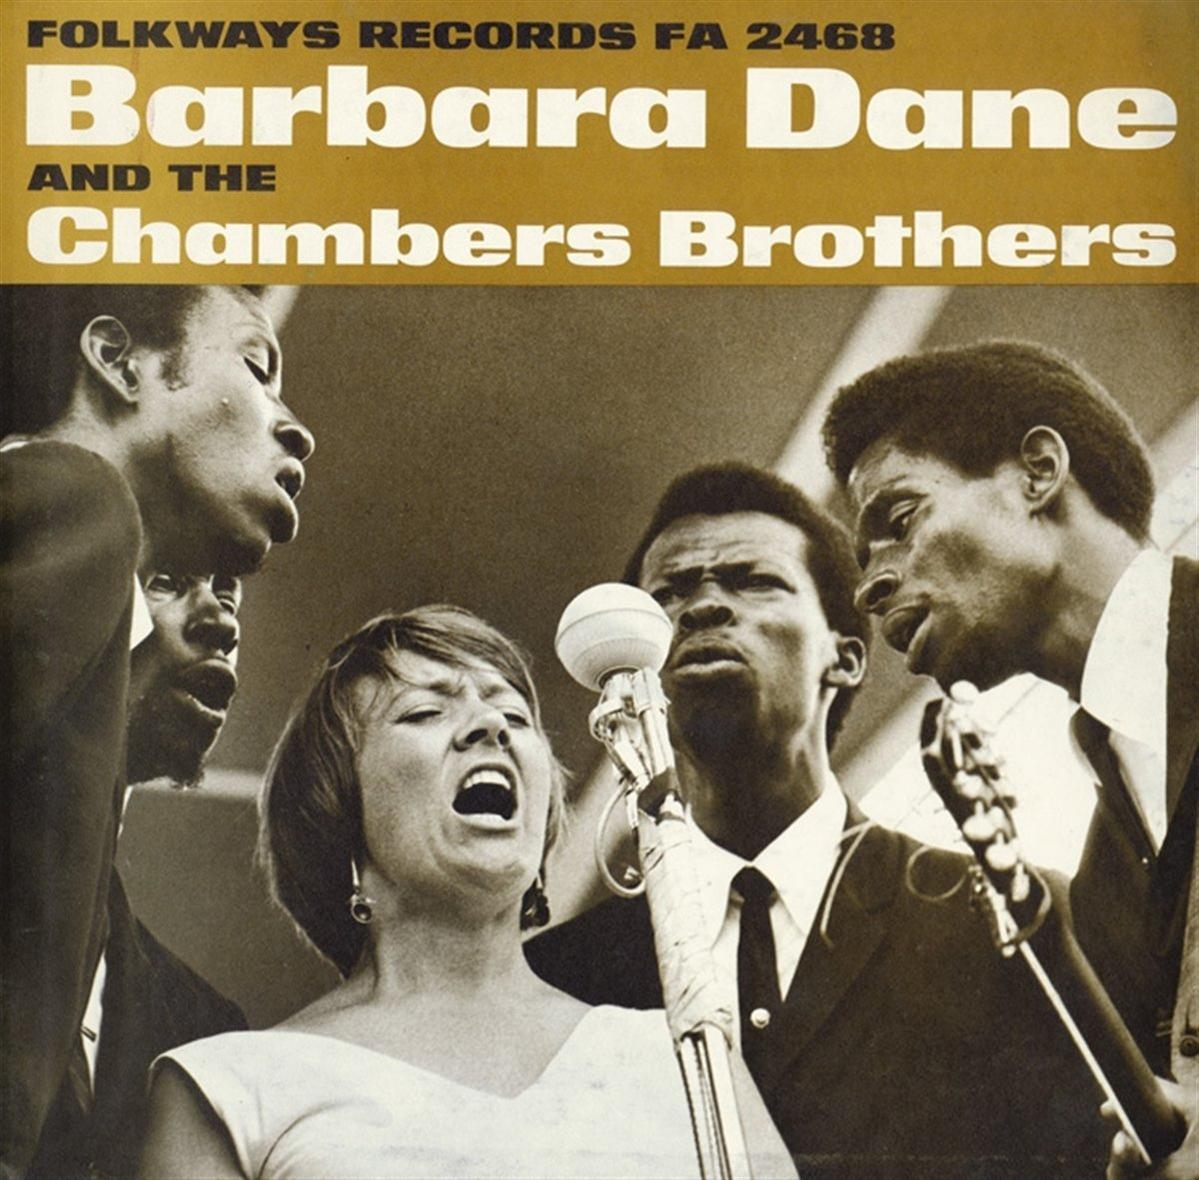 Brothers The The Brothers And Chambers Dane And (Vinyl) Chambers Barbara - -